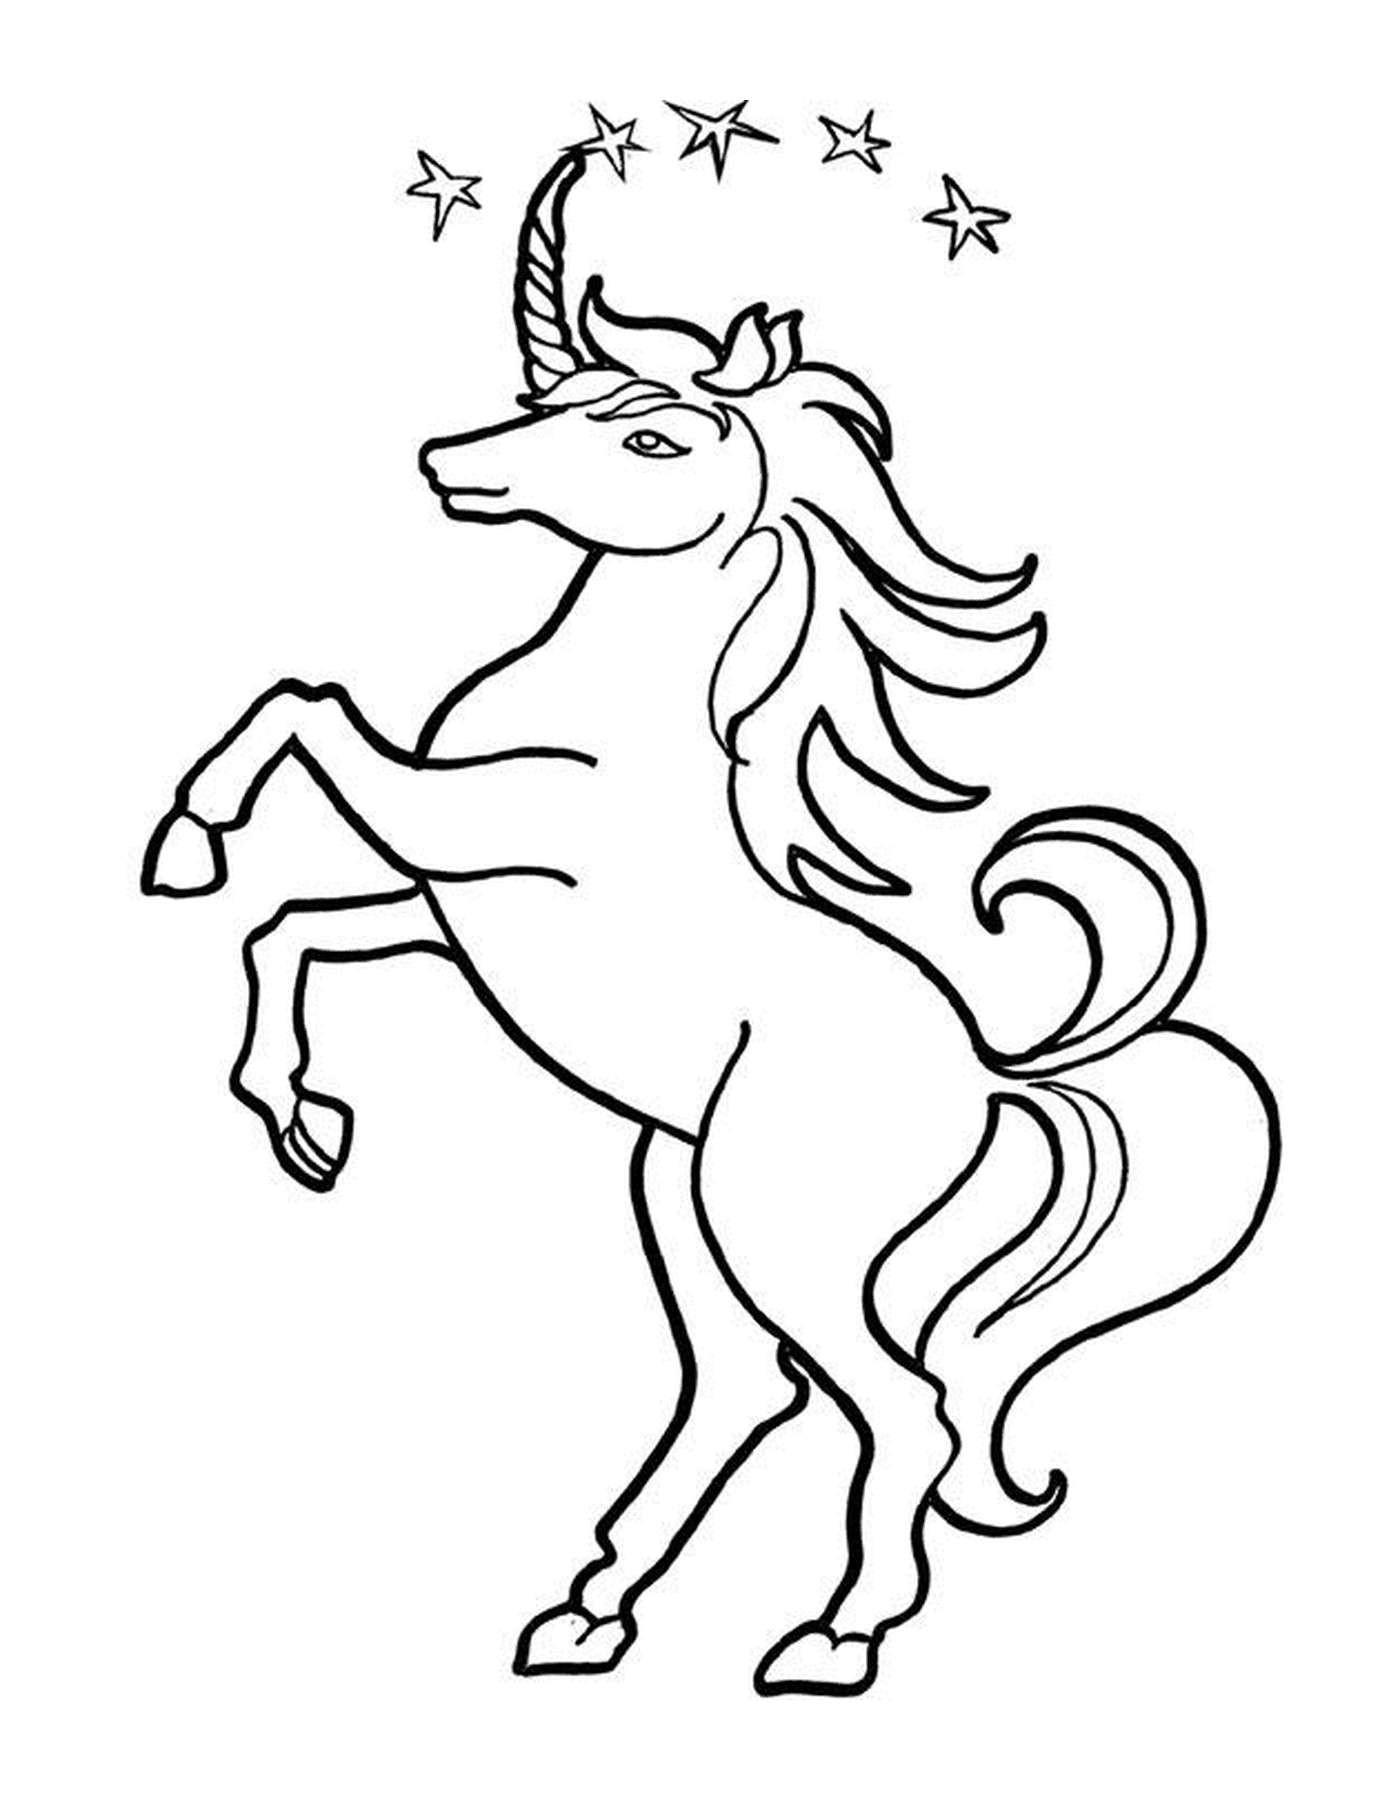  mysterious and legendary unicorn 